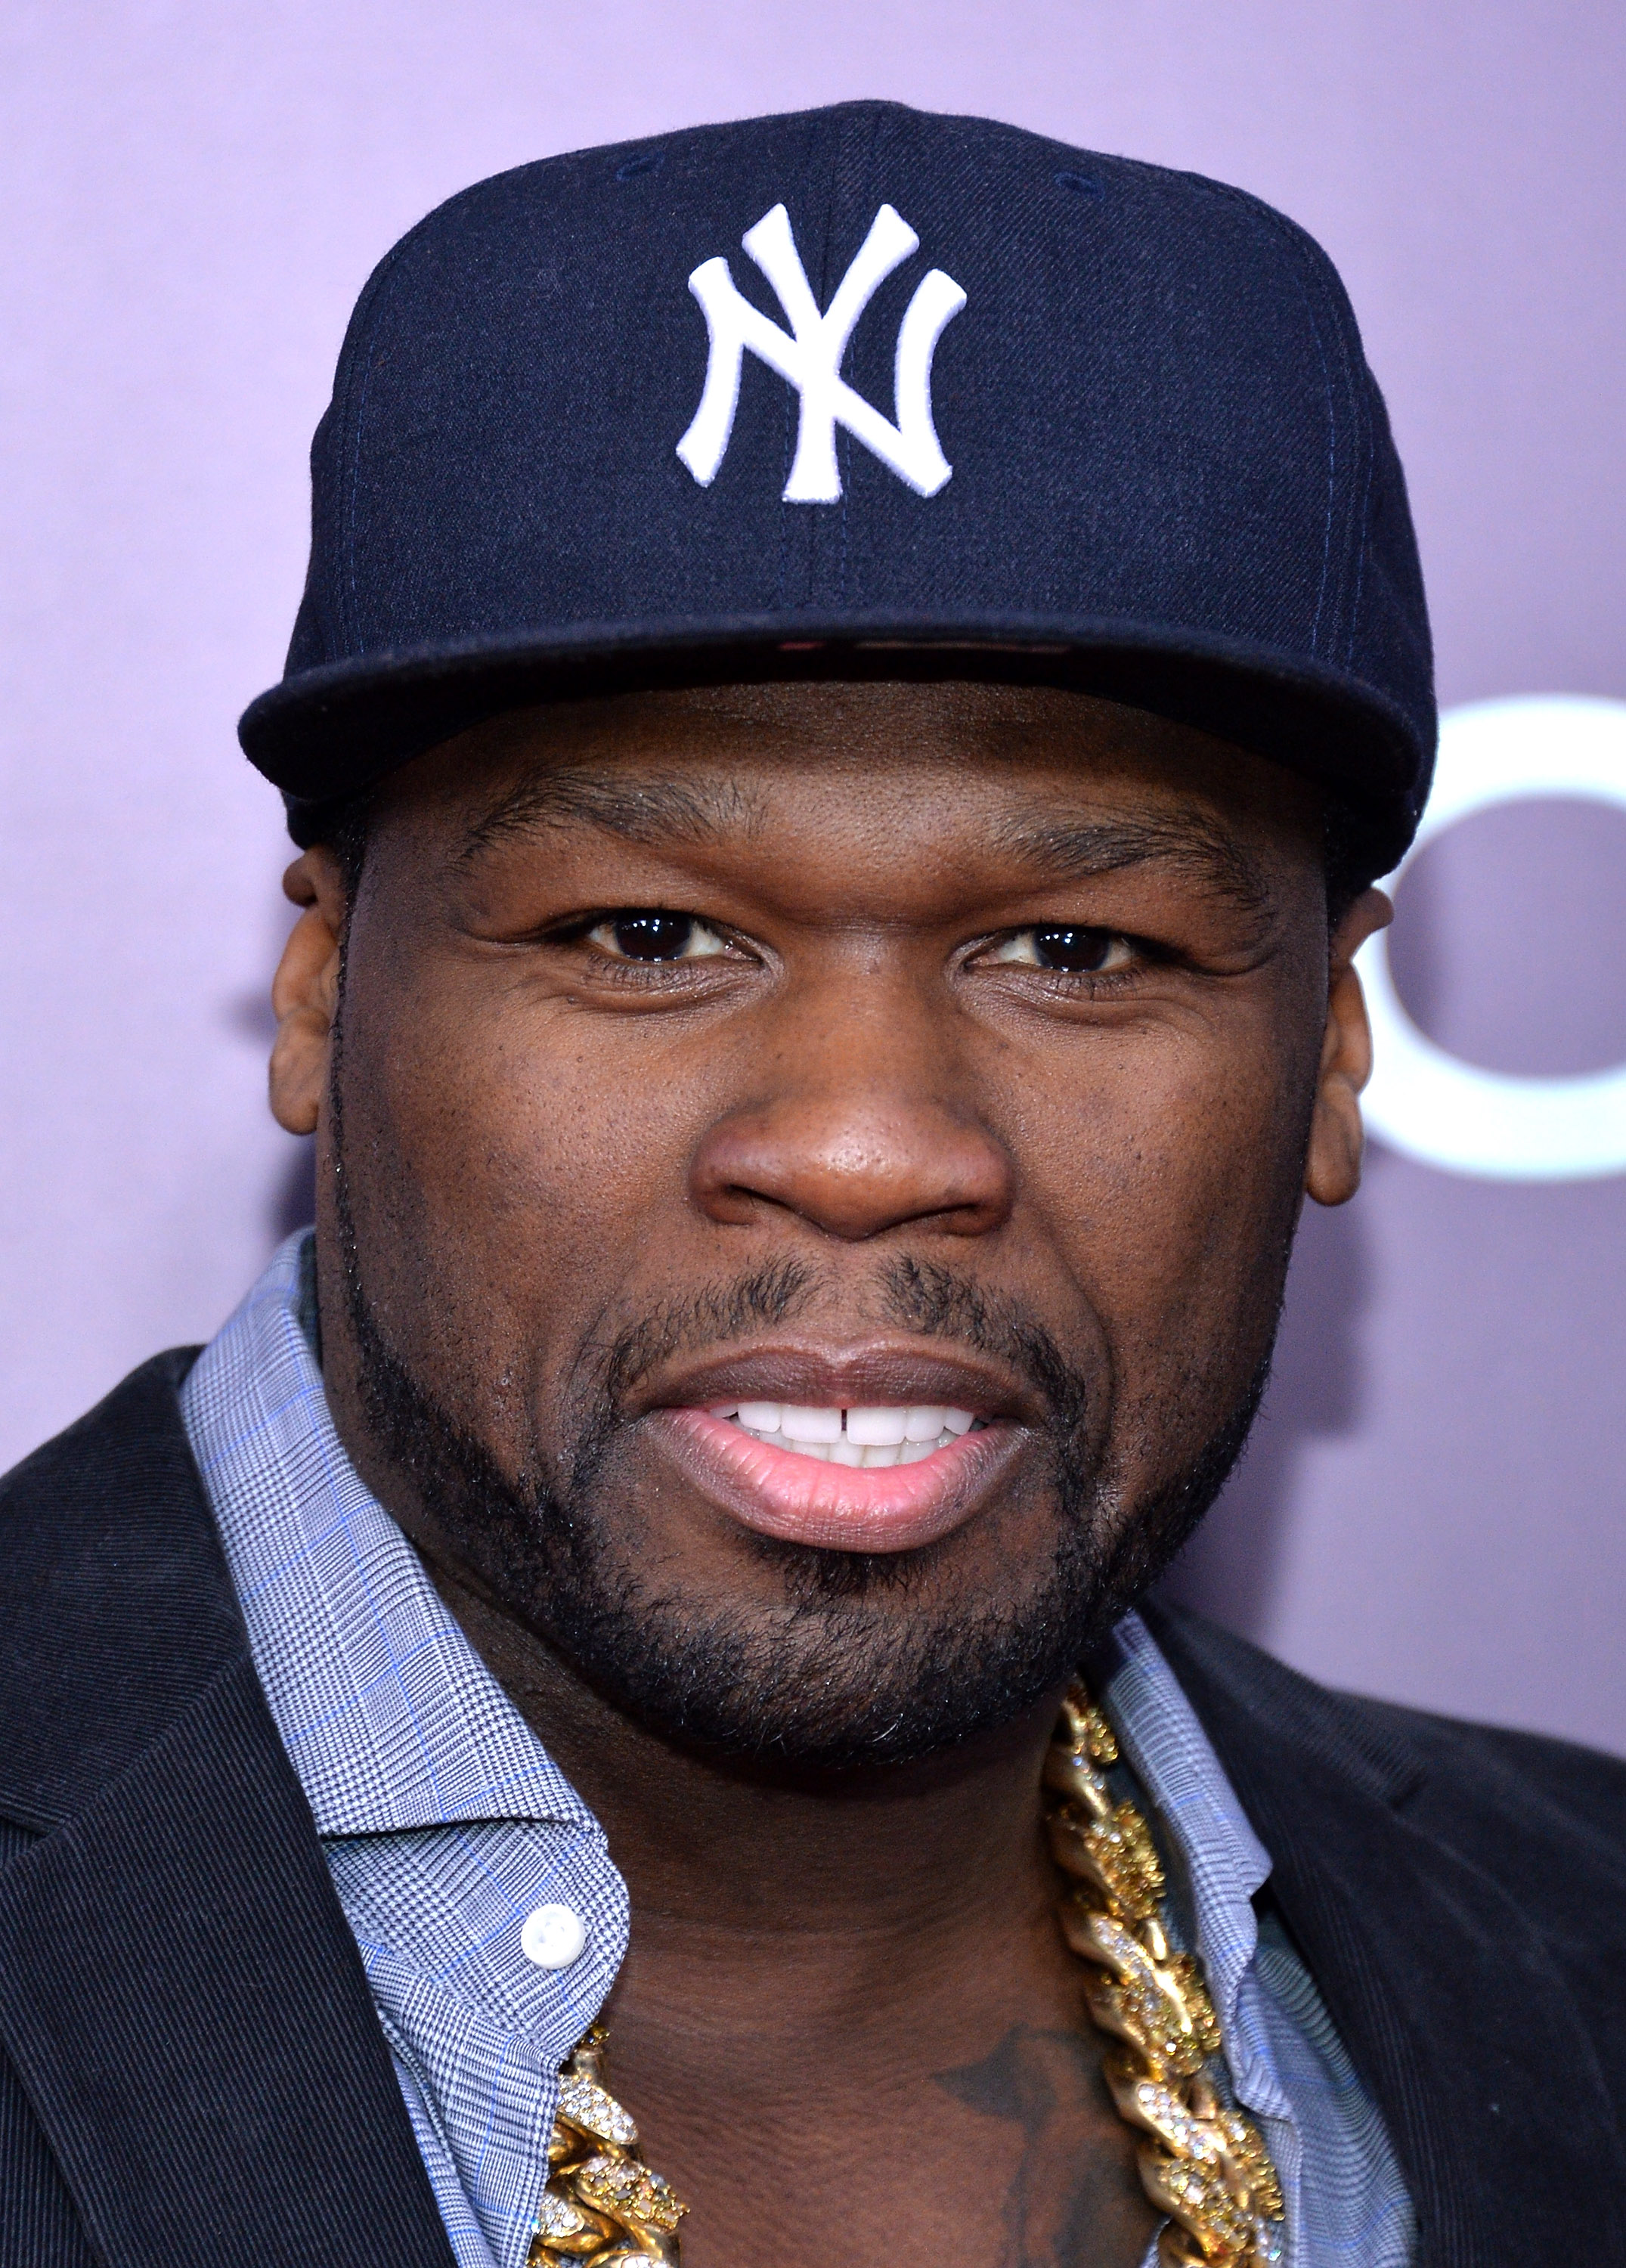 Pictures of 50 Cent, Picture #9 - Pictures Of Celebrities